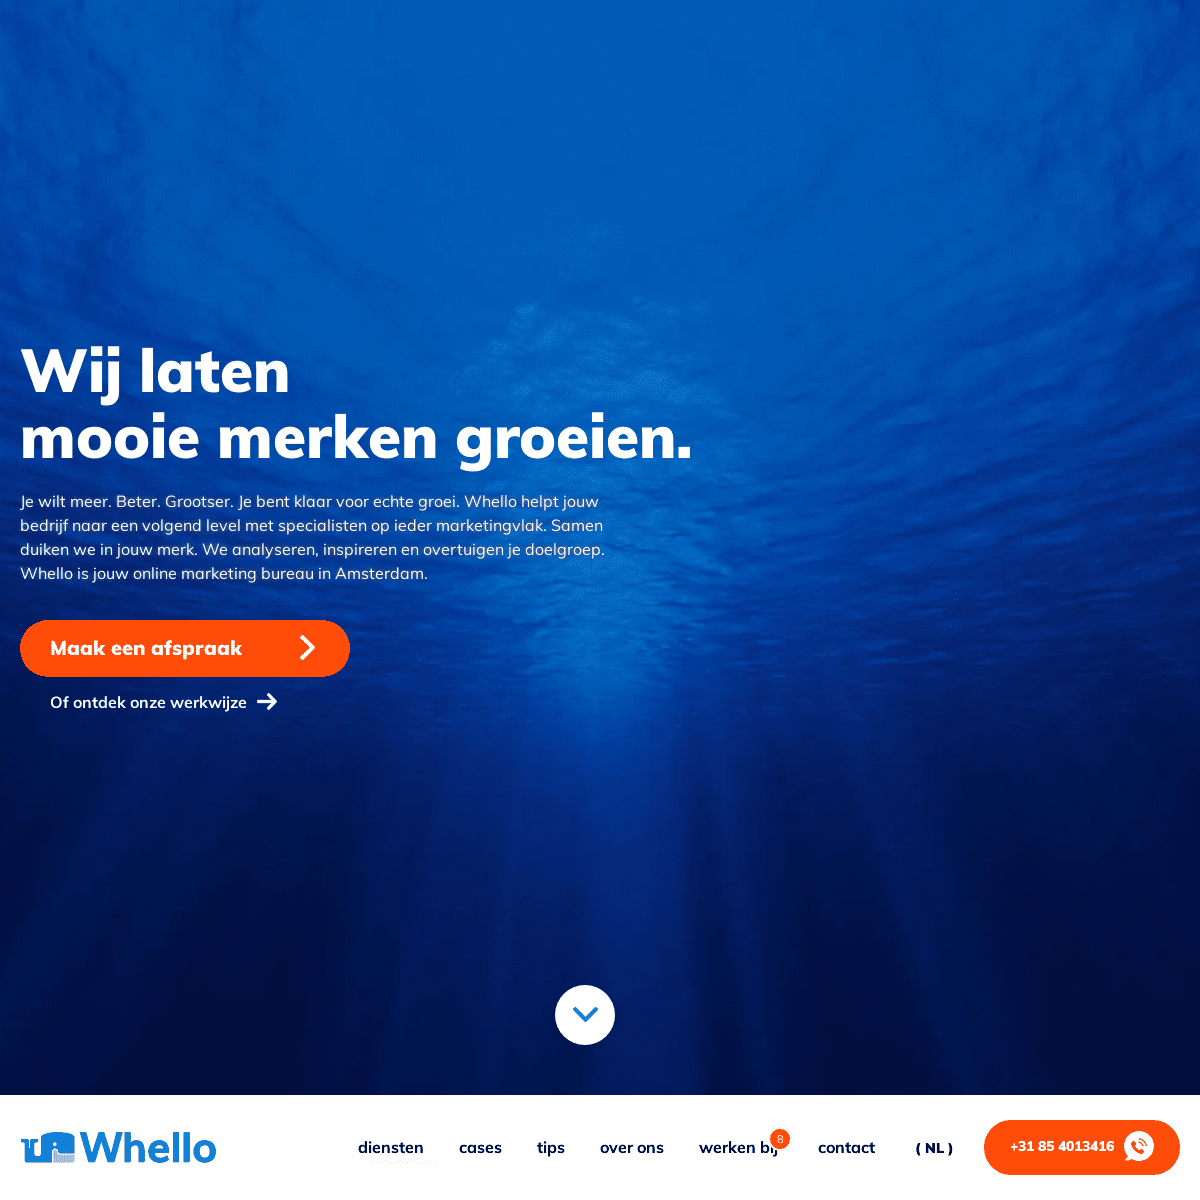 A complete backup of https://whello.nl